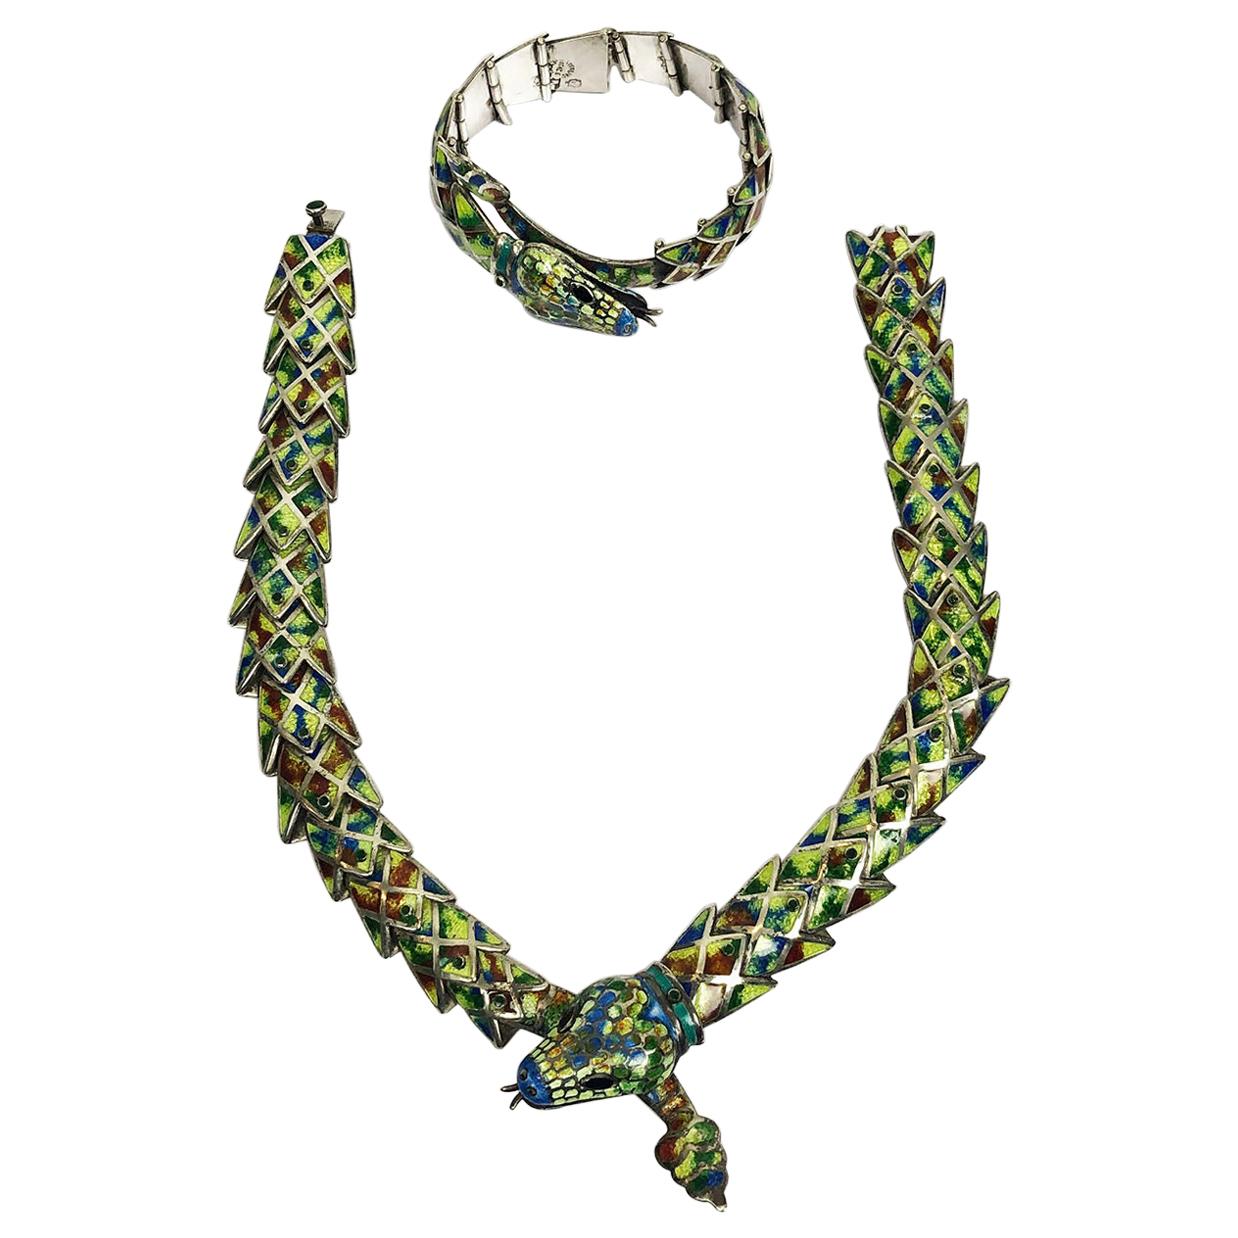 Reticulated Silver and Enamel Serpent Necklace and Bracelet by Jerónimo Fuentes